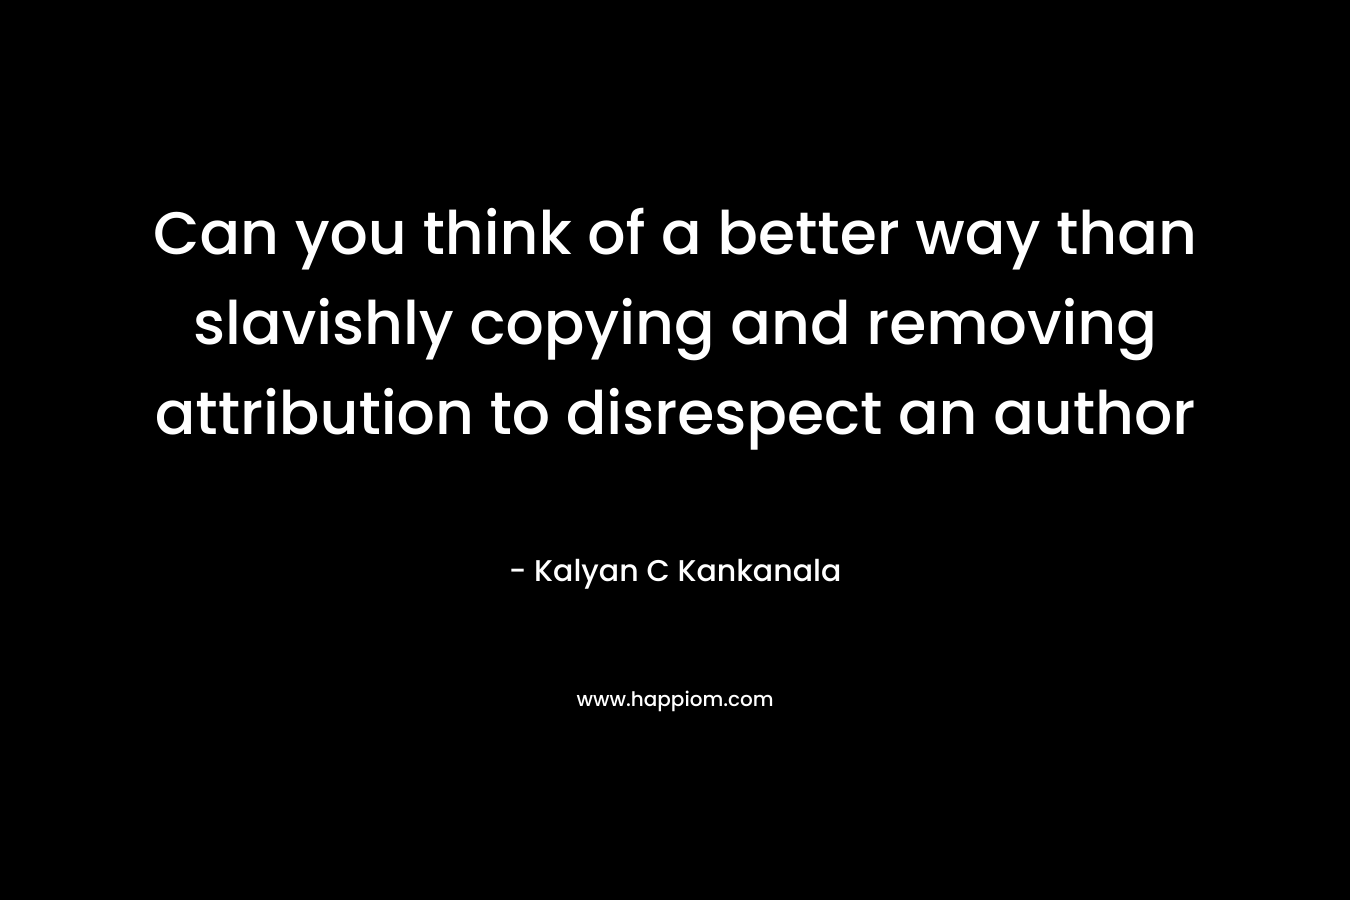 Can you think of a better way than slavishly copying and removing attribution to disrespect an author